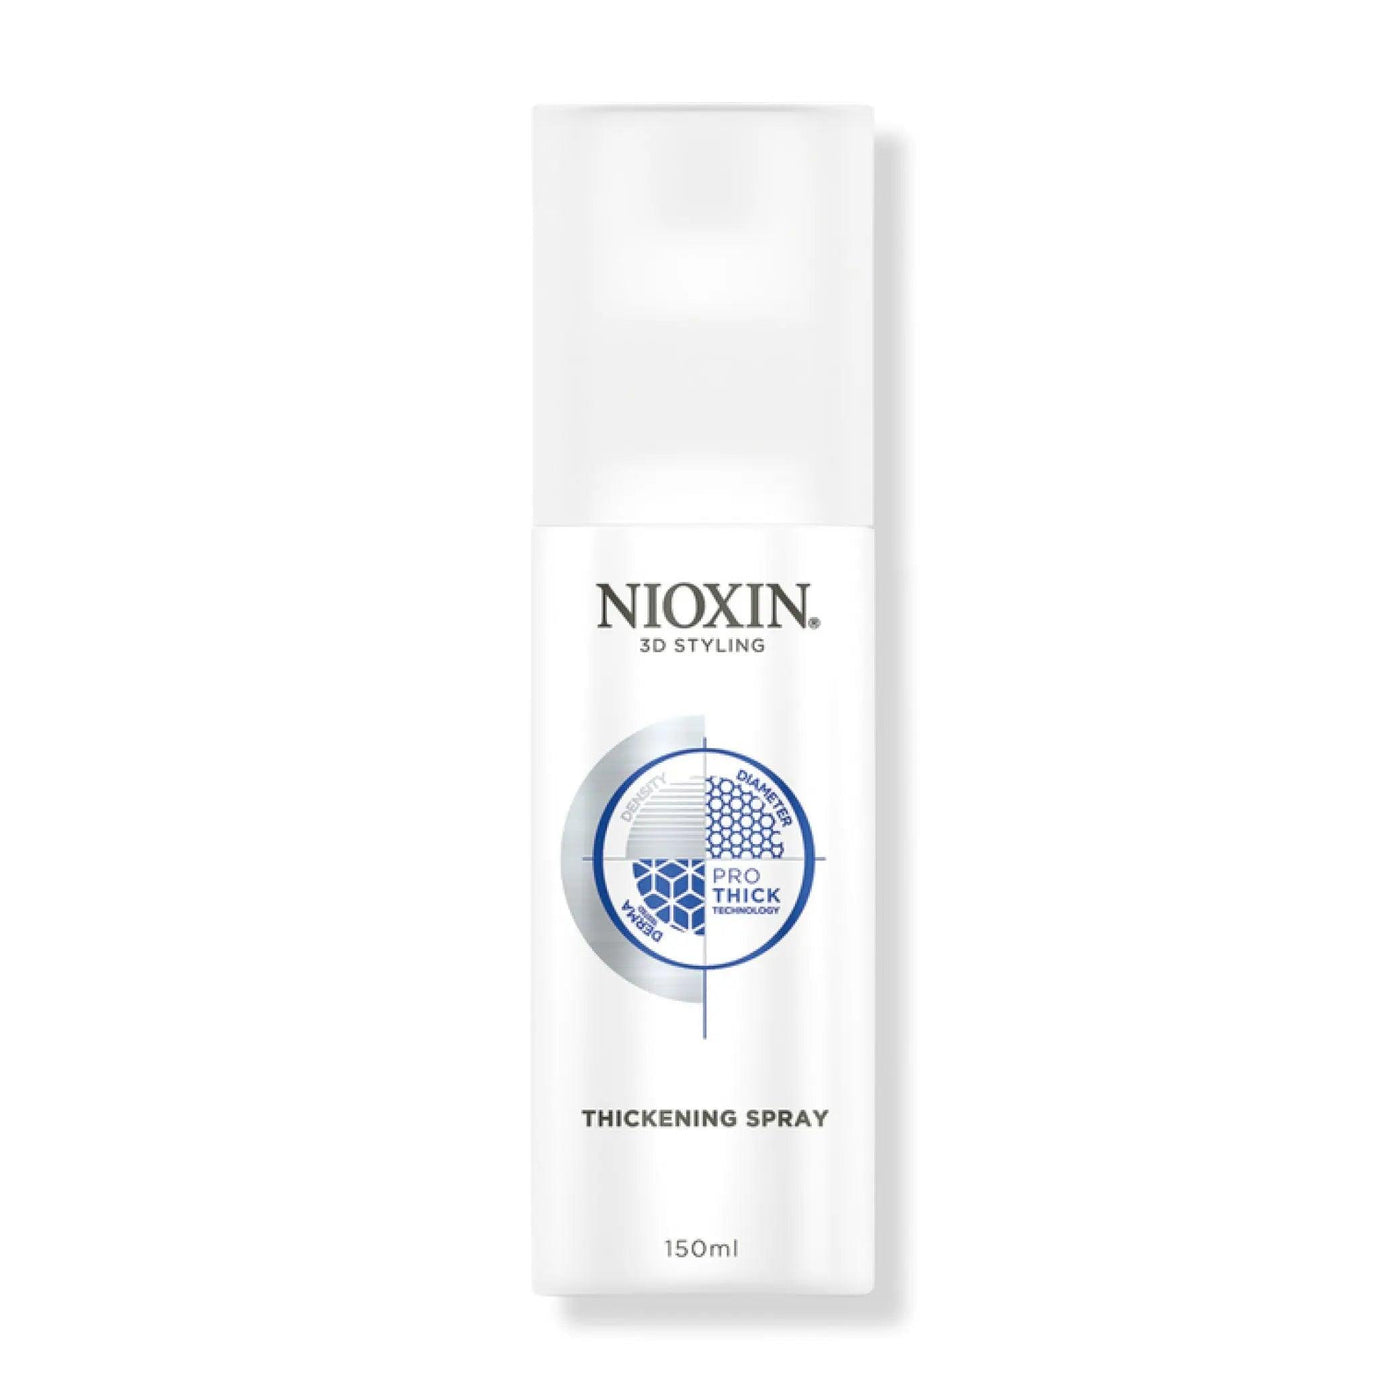 3d Styling Thickening Spray Nioxin Boutique Deauville